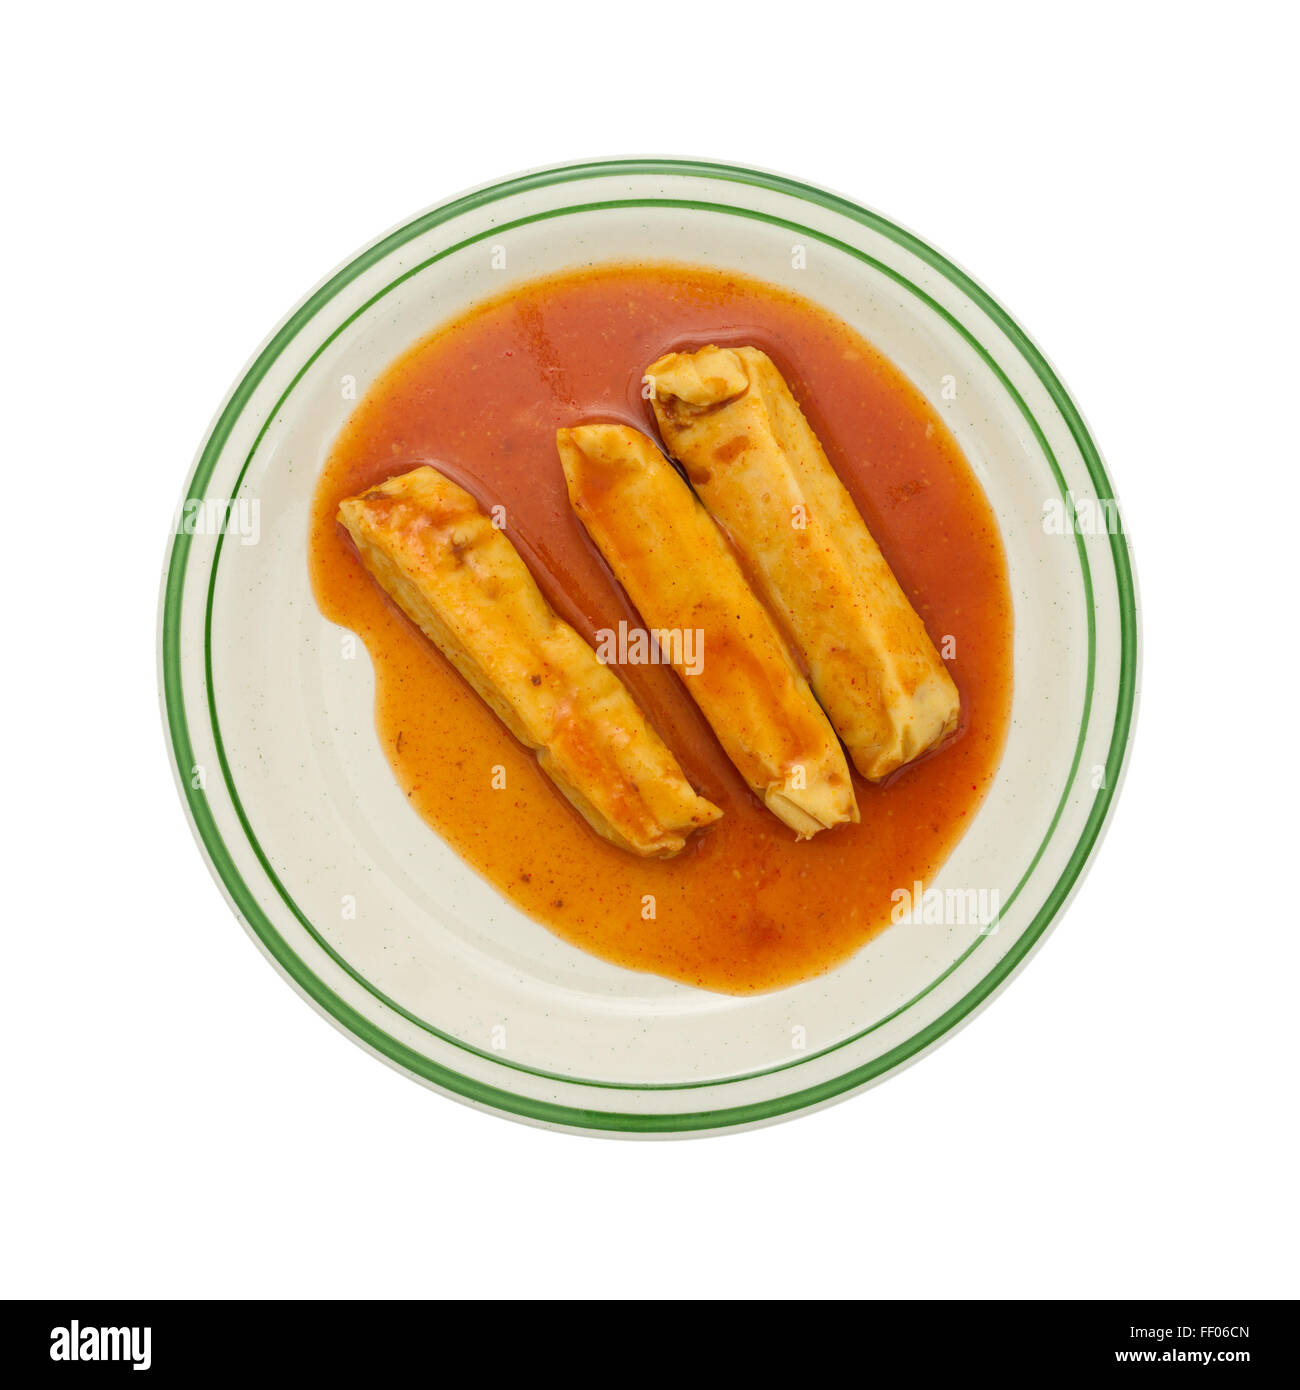 Top view of a serving of canned tamales in chili sauce on a plate isolated on a white background. Stock Photo